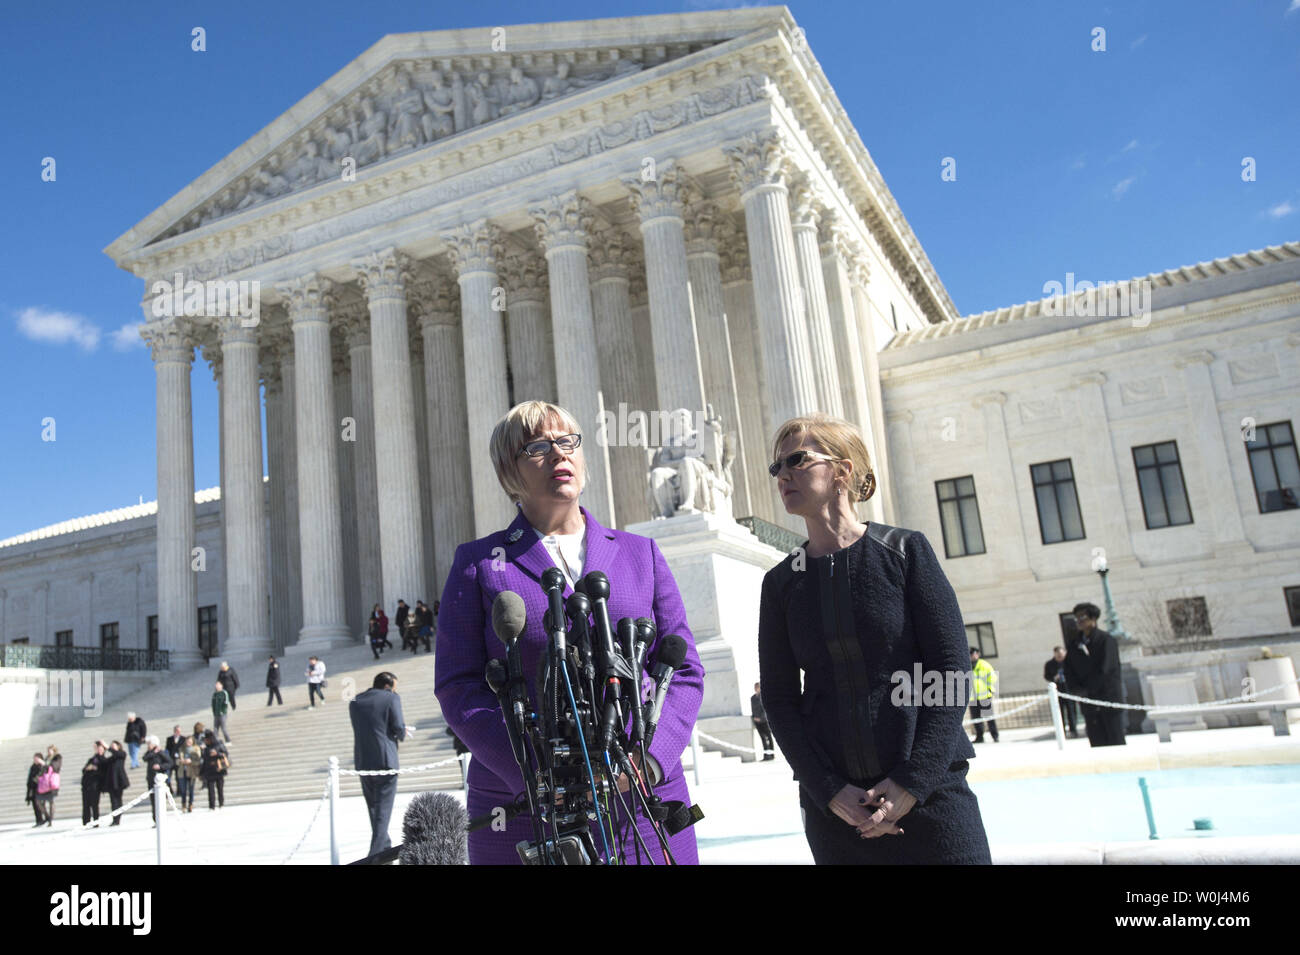 Lead plaintiff Amy Hagstrom Miller (L), CEO of Whole Woman's Health, and Nancy Northup, CEO of Center for Reproductive Rights, speak to the media after the Supreme Court heard arguments in the Whole Woman’s Health v. Hellerstedt case, at the Supreme Court in Washington, D.C. on March 2, 2016. The case The case will decide the legality of a 2013 Texas law that plaintiffs say restricts a woman's constitutional right to end a pregnancy by putting an 'undue burden' on them. Photo by Kevin Dietsch/UPI Stock Photo